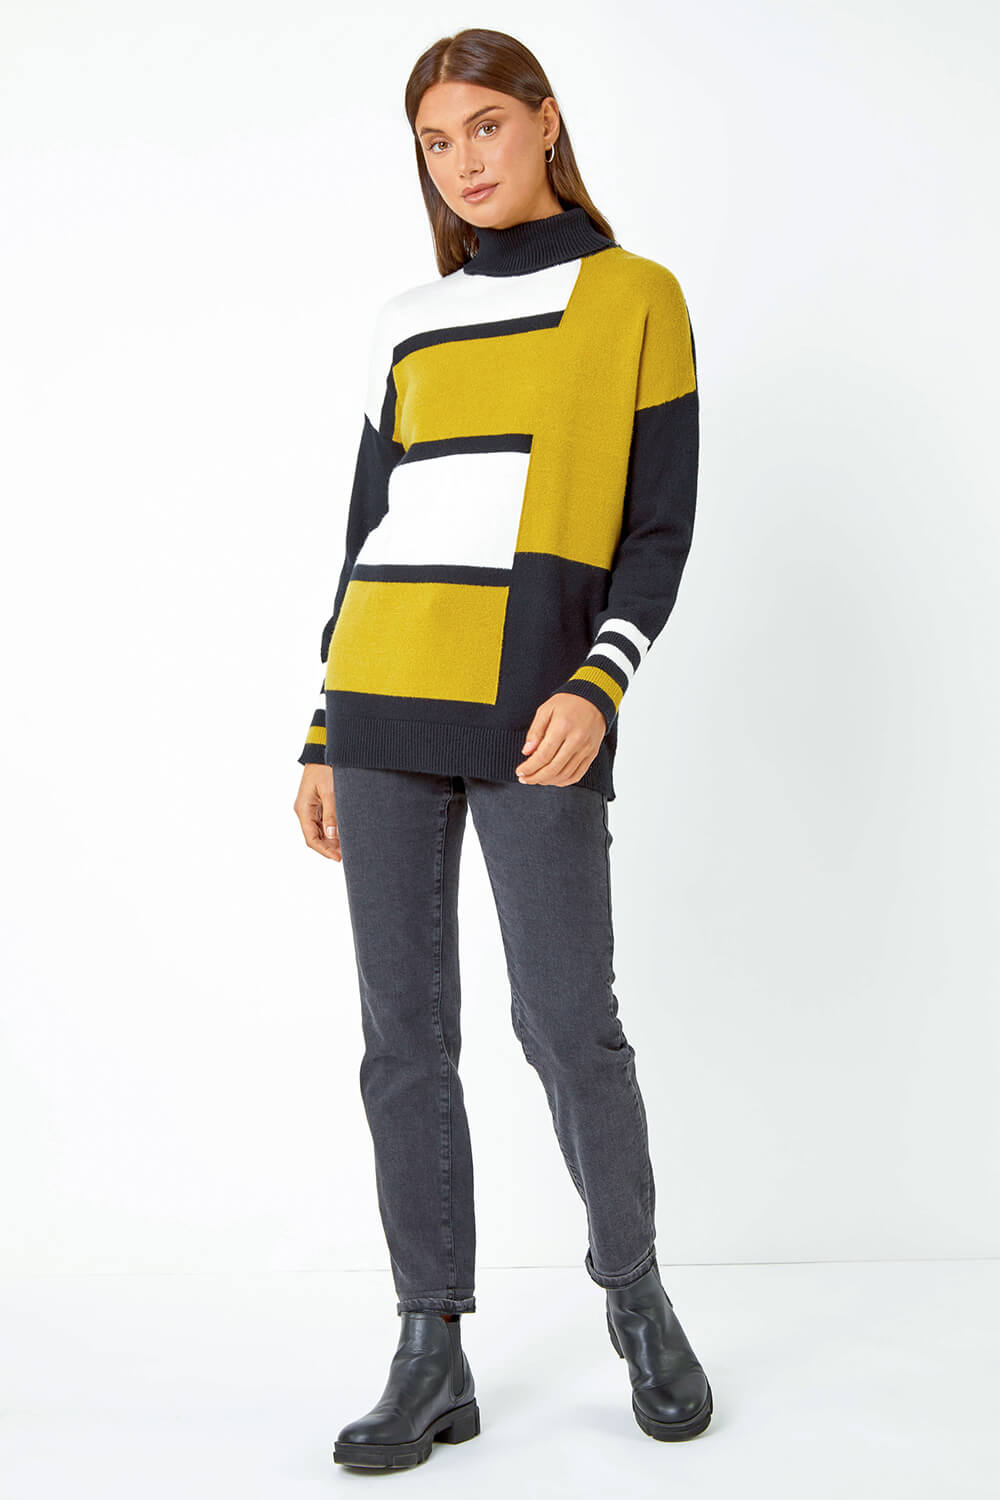 Multi  Colour Block Knitted Jumper, Image 2 of 5